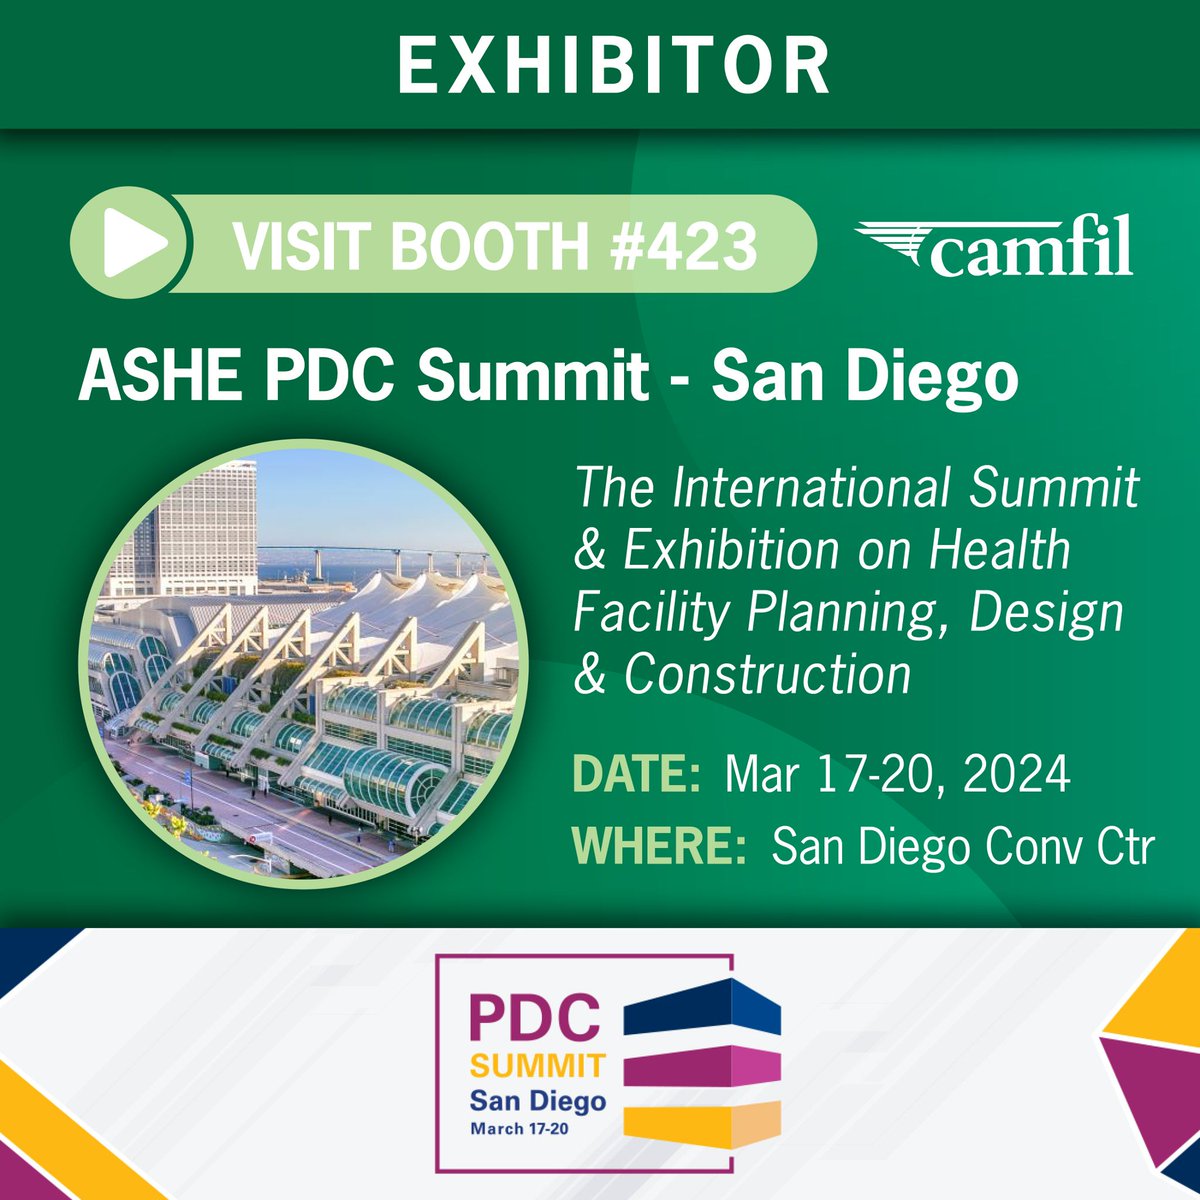 We are thrilled to announce our participation in the 2024 ASHE PDC Summit. Visit us at booth 423 to discover how our air filtration systems can enhance indoor air quality in hospitals and clinics. -> okt.to/IiZehs.

#HealthCare #ASHEPDCSummit #CamfilUSA #AirFiltration